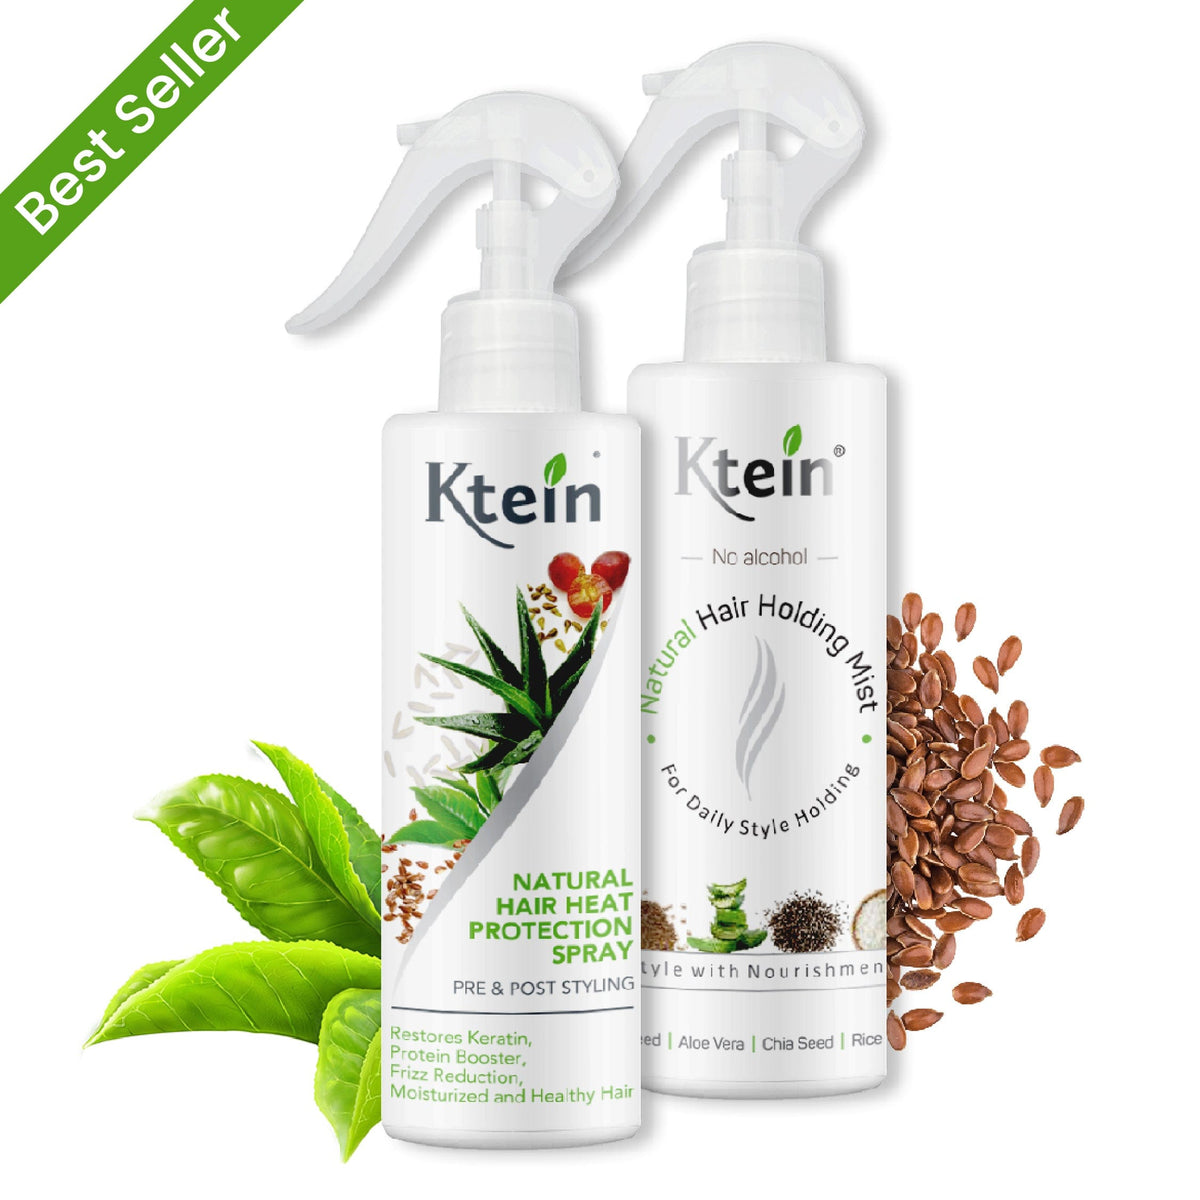 Ktein Daily Hair Styling Combo - Ktein Cosmetics - Essence Of Natural Hair Care Products